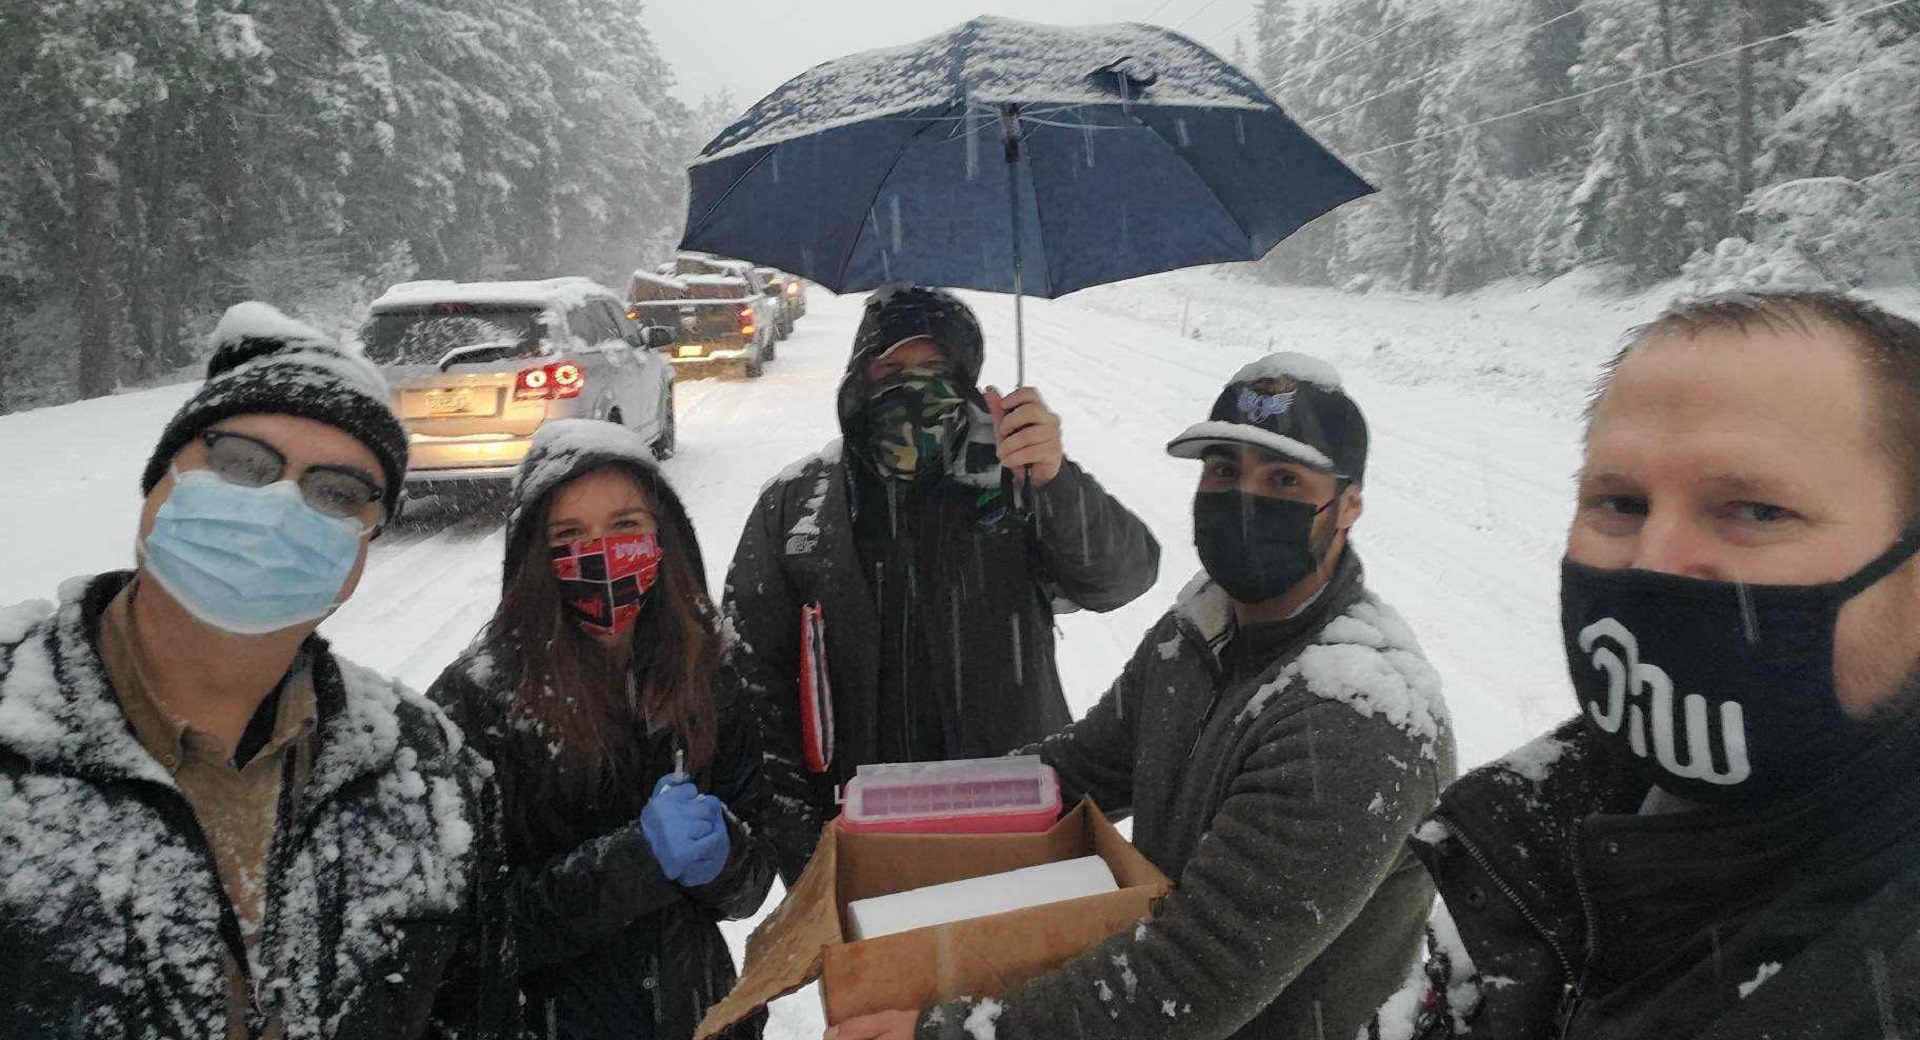 Healthcare workers trapped in blizzard give trapped motorists COVID-19 vaccines